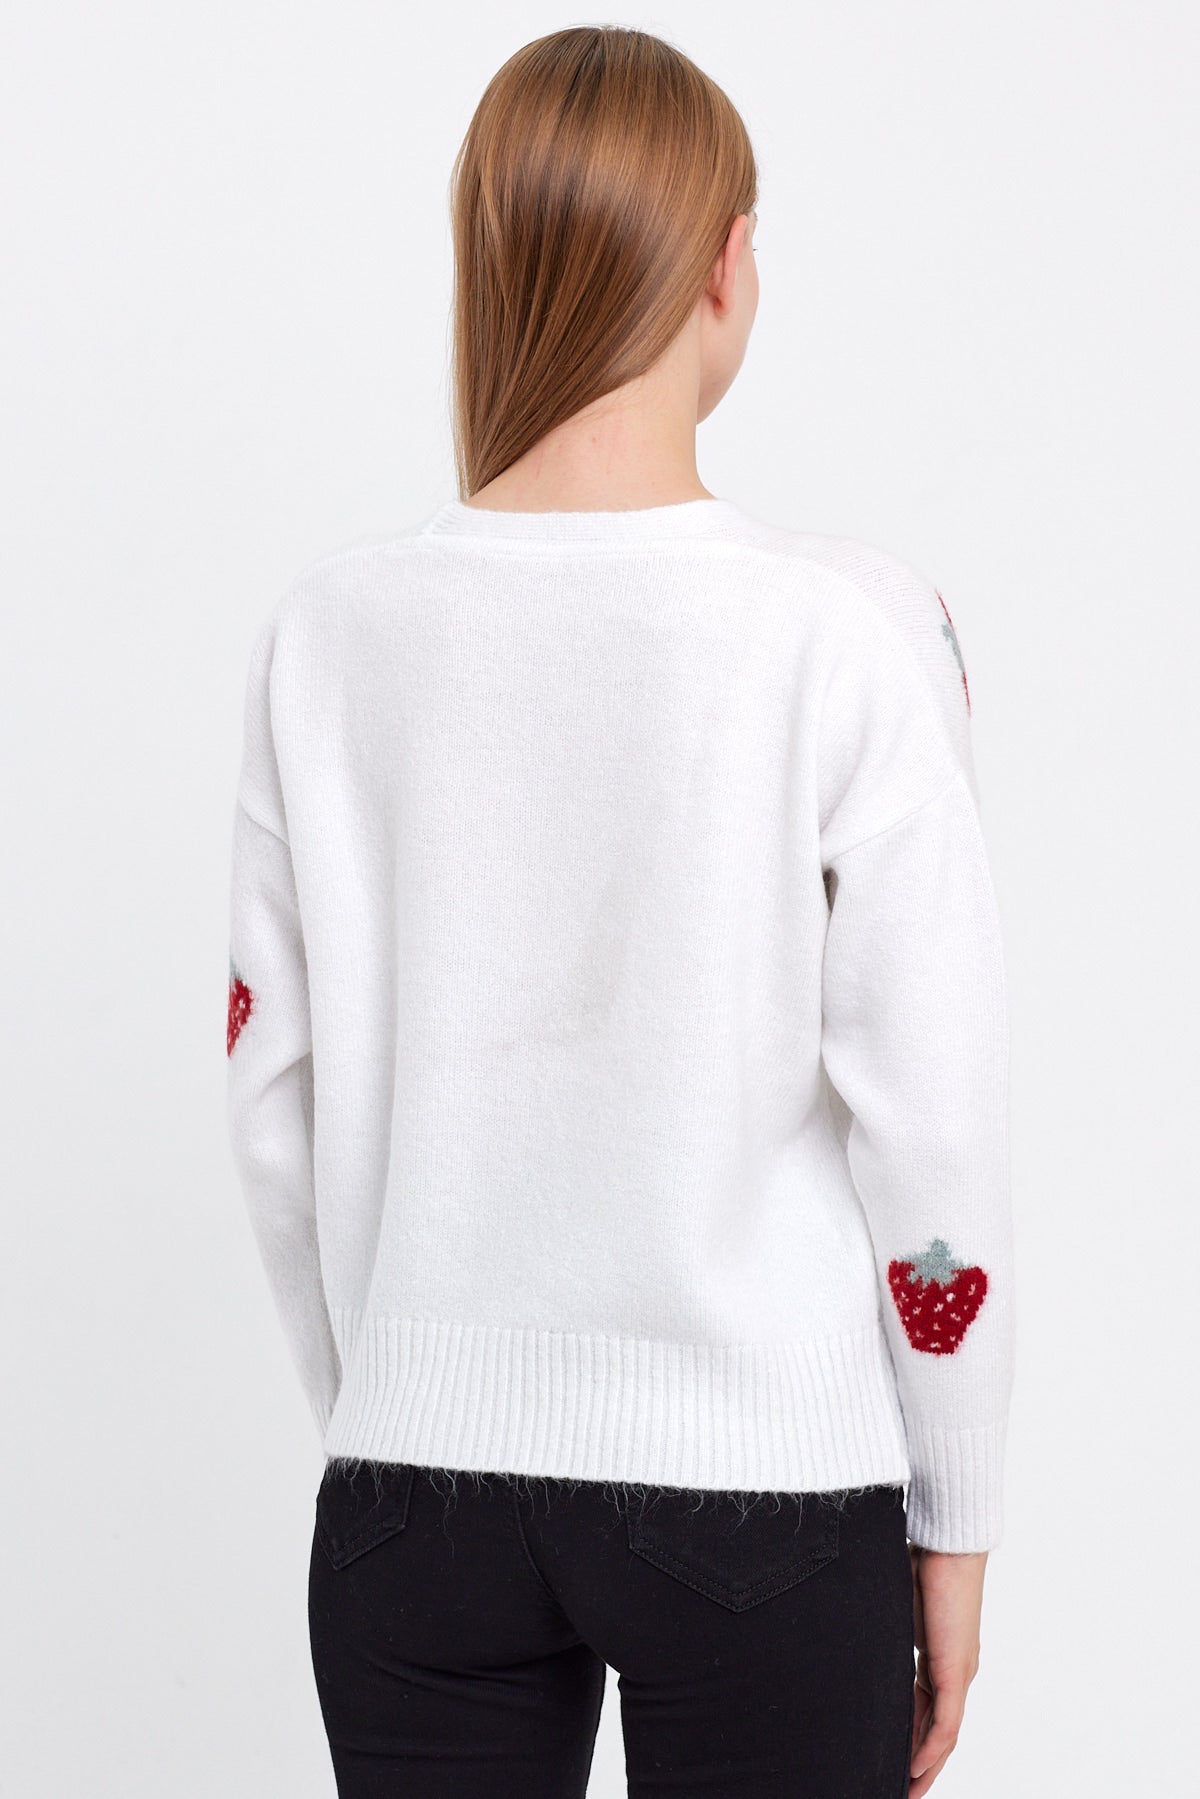 Strawberry Knit Cardigan Cropped - Cute Collection